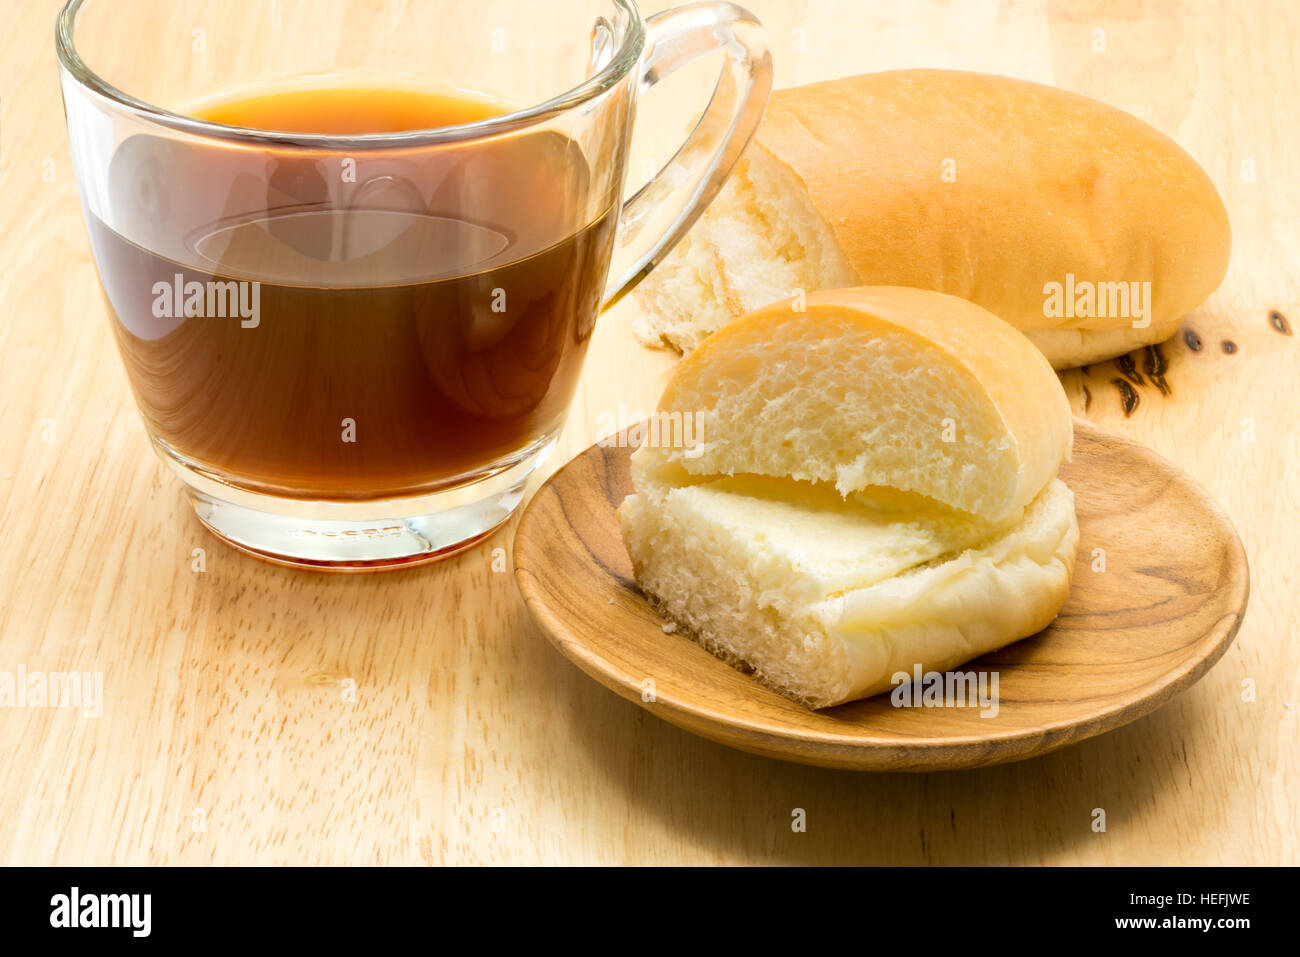 Hotdog bread filled with sweetened butter cream and a cup of coffee on wooden board Stock Photo